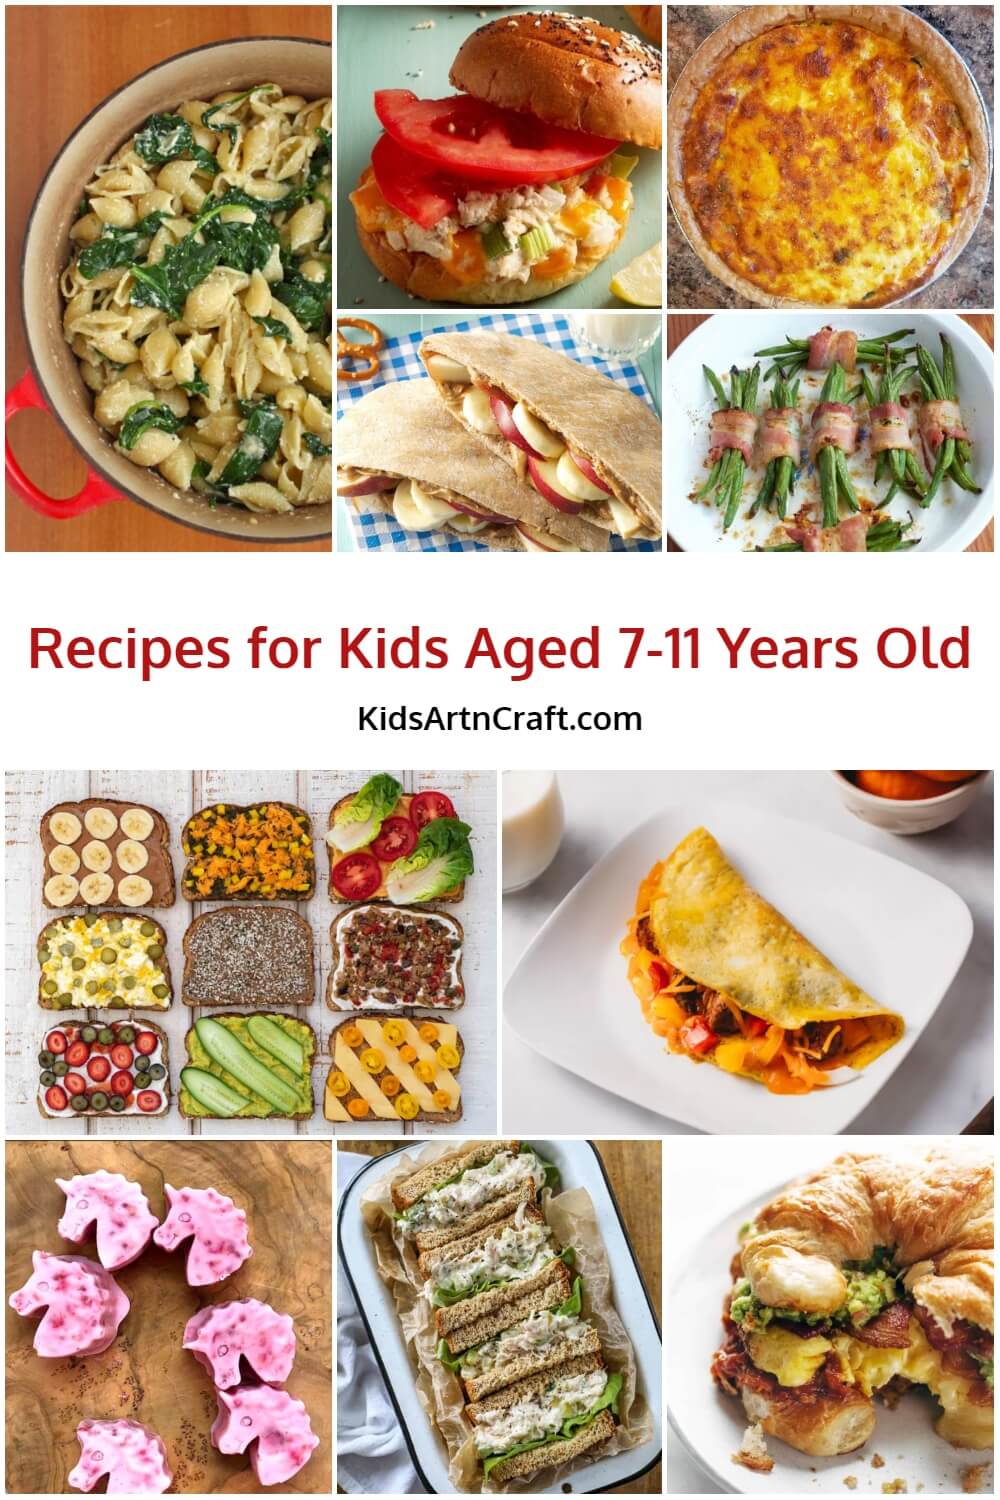 Recipes For Kids Aged 7-11 Years Old